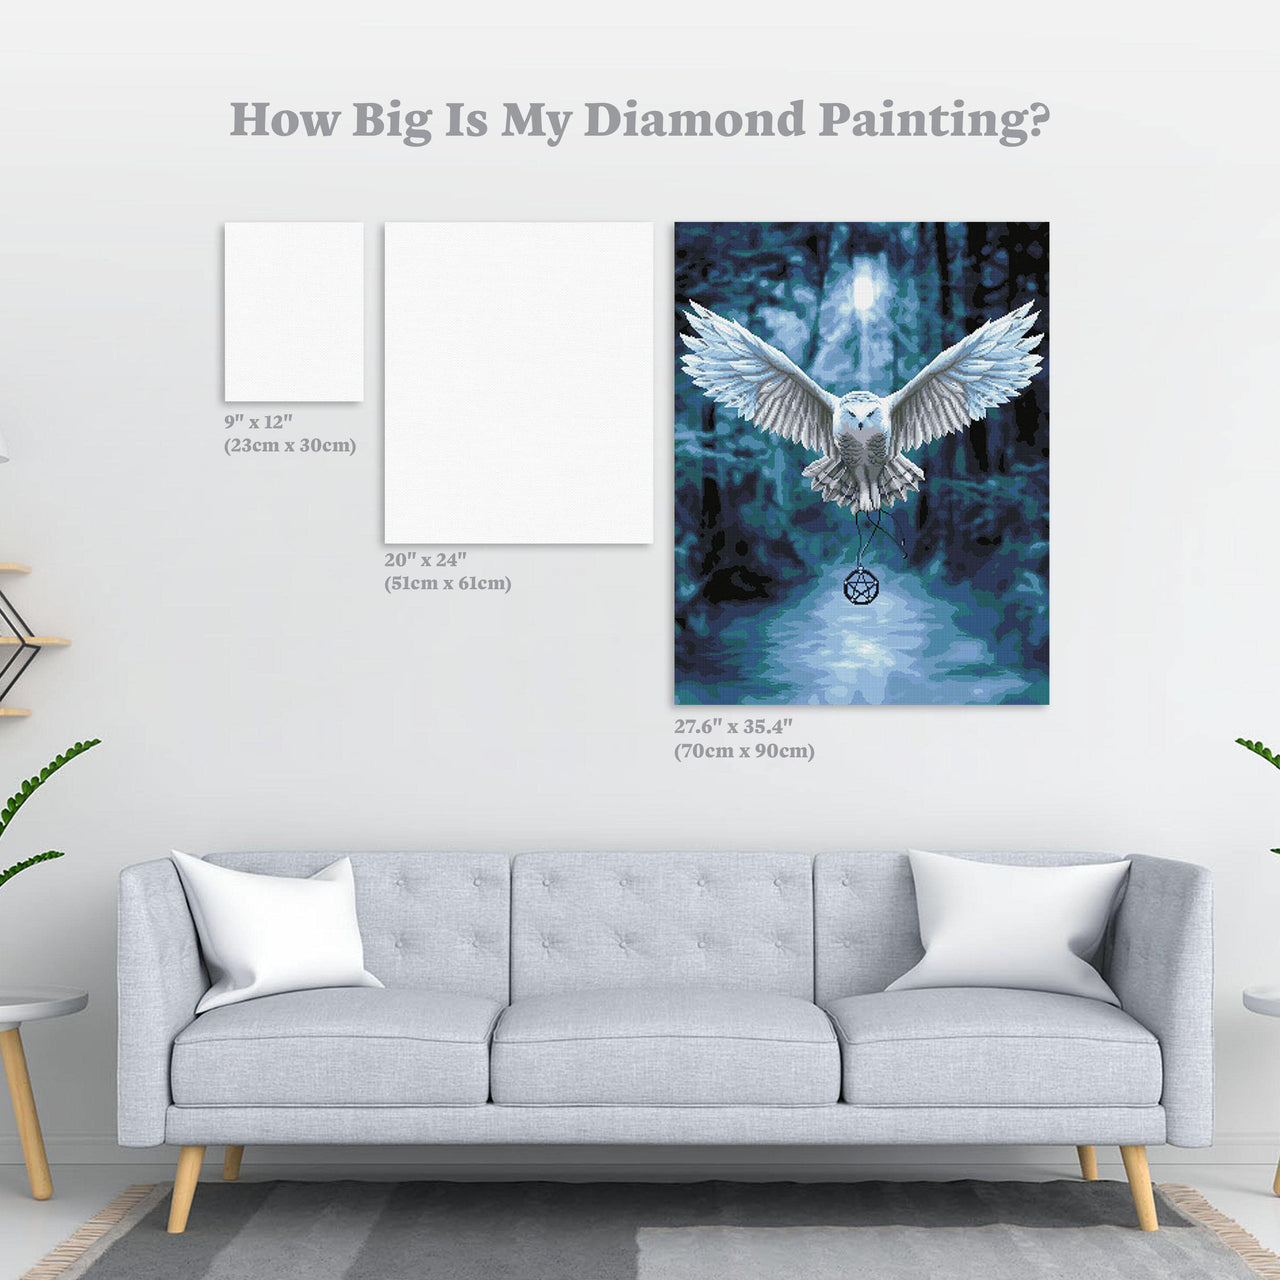 Diamond Painting Awake Your Magic 27.6" x 35.4" (70cm x 90cm) / Square with 23 Colors and 2 ABs / 98,889